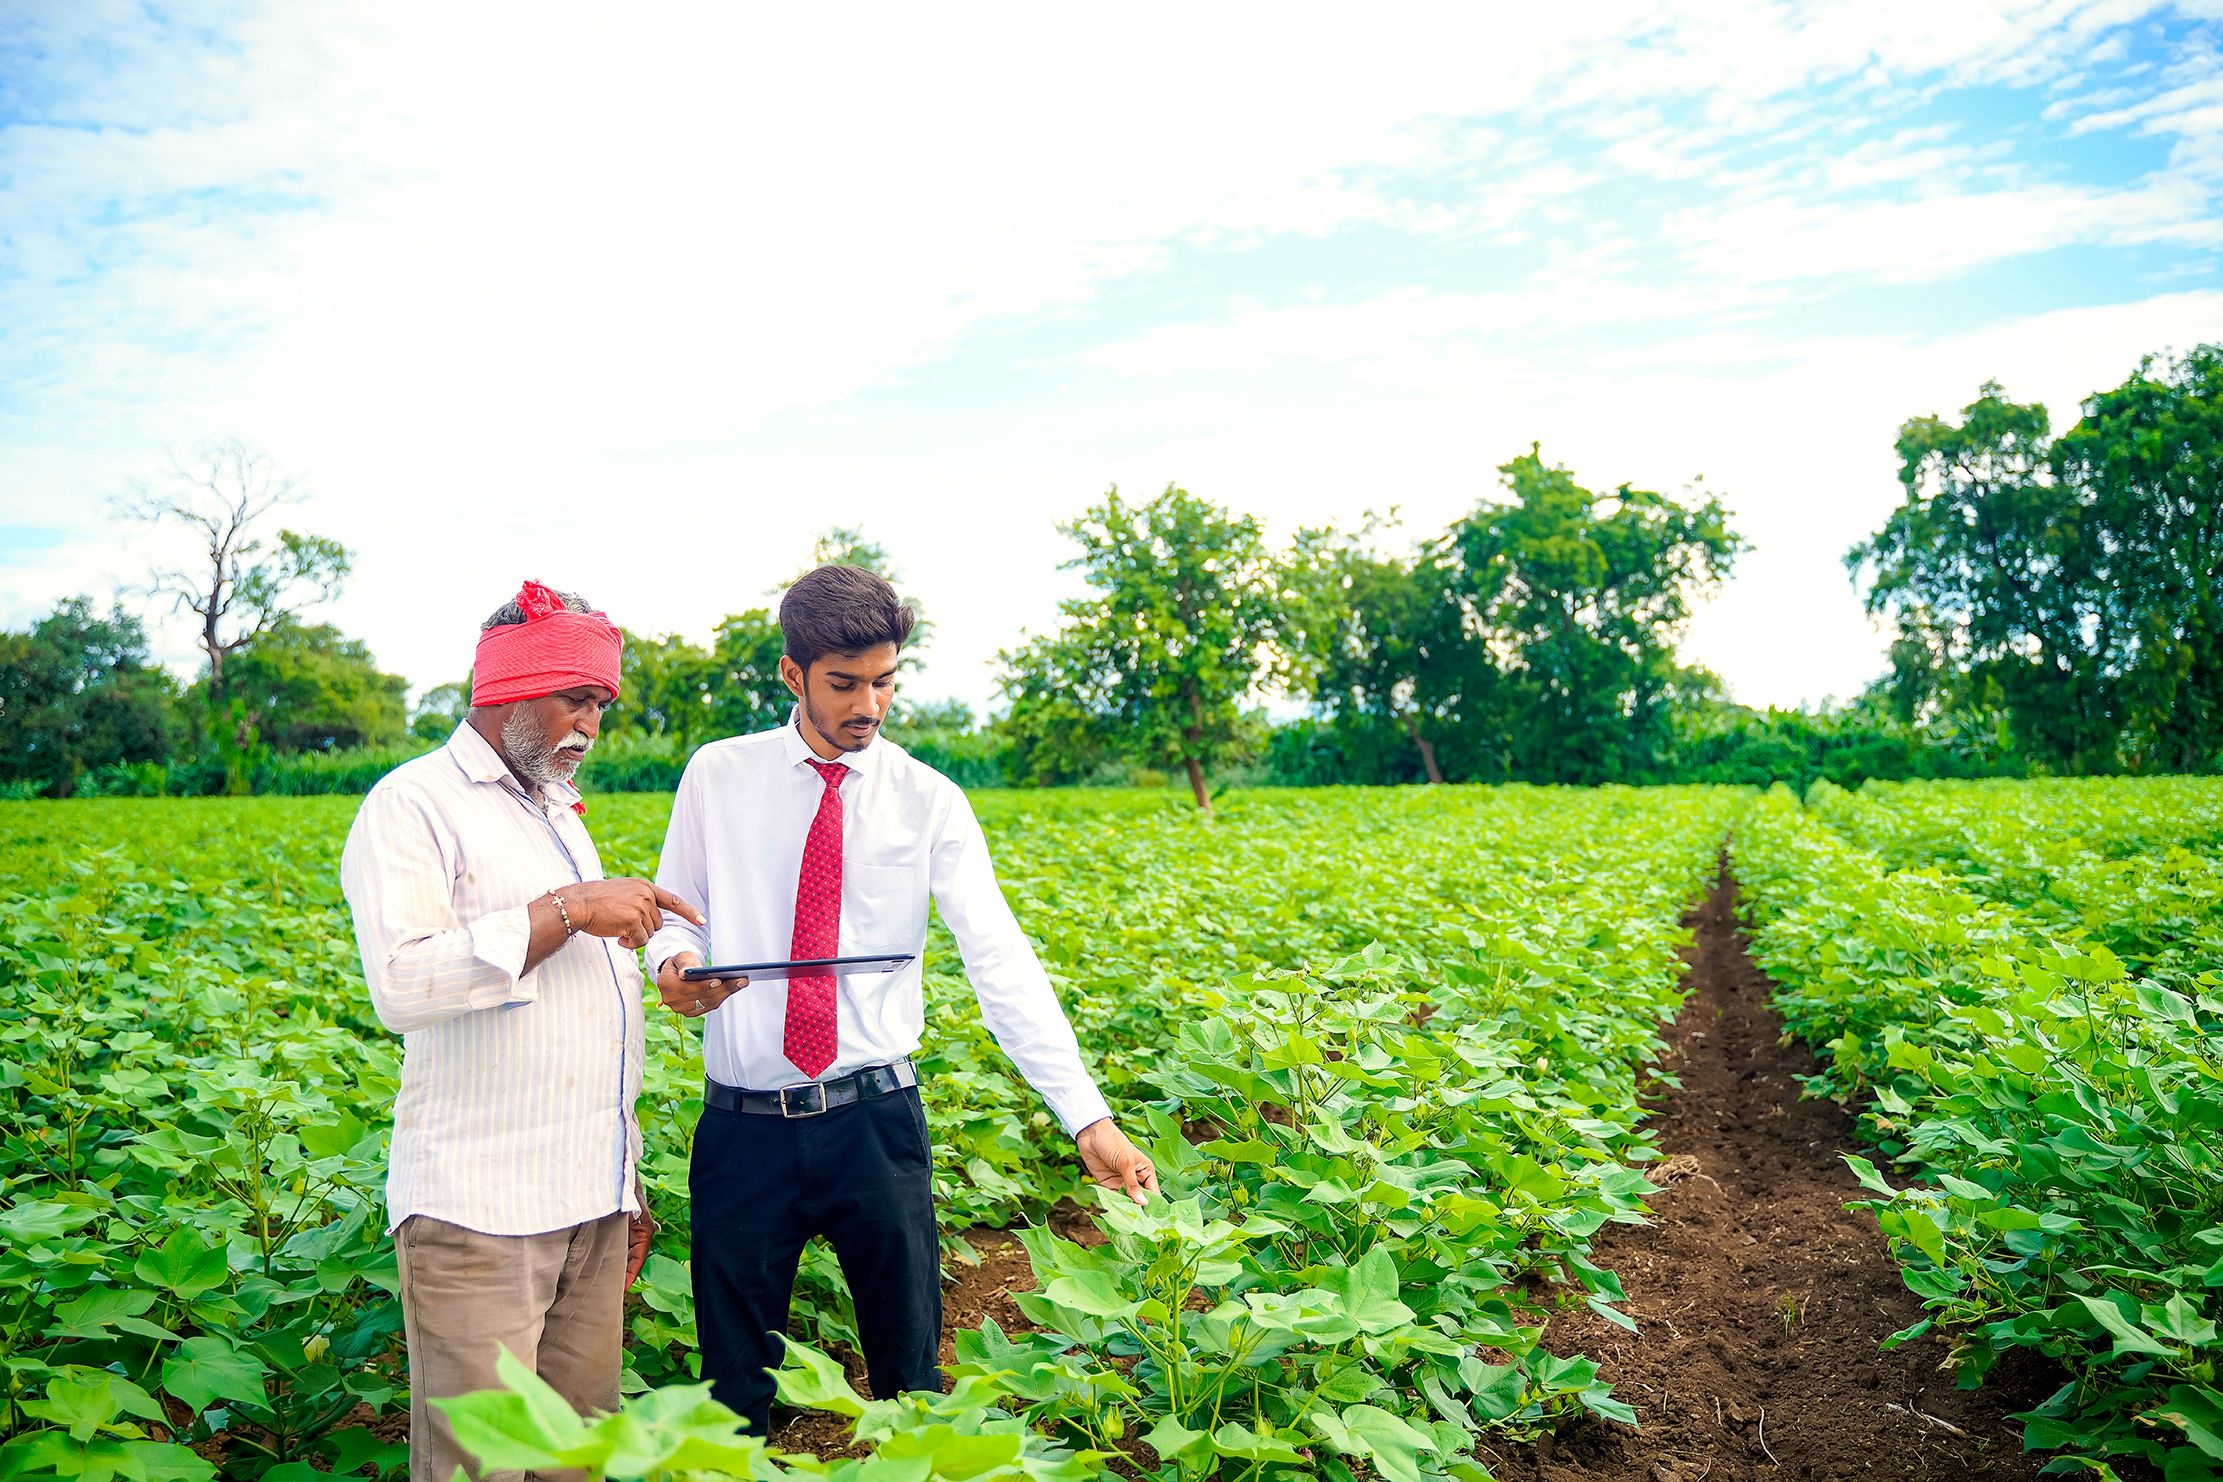 Agritech firm DeHaat's FY23 revenue set to rise by over 80% to Rs 2,300 Cr